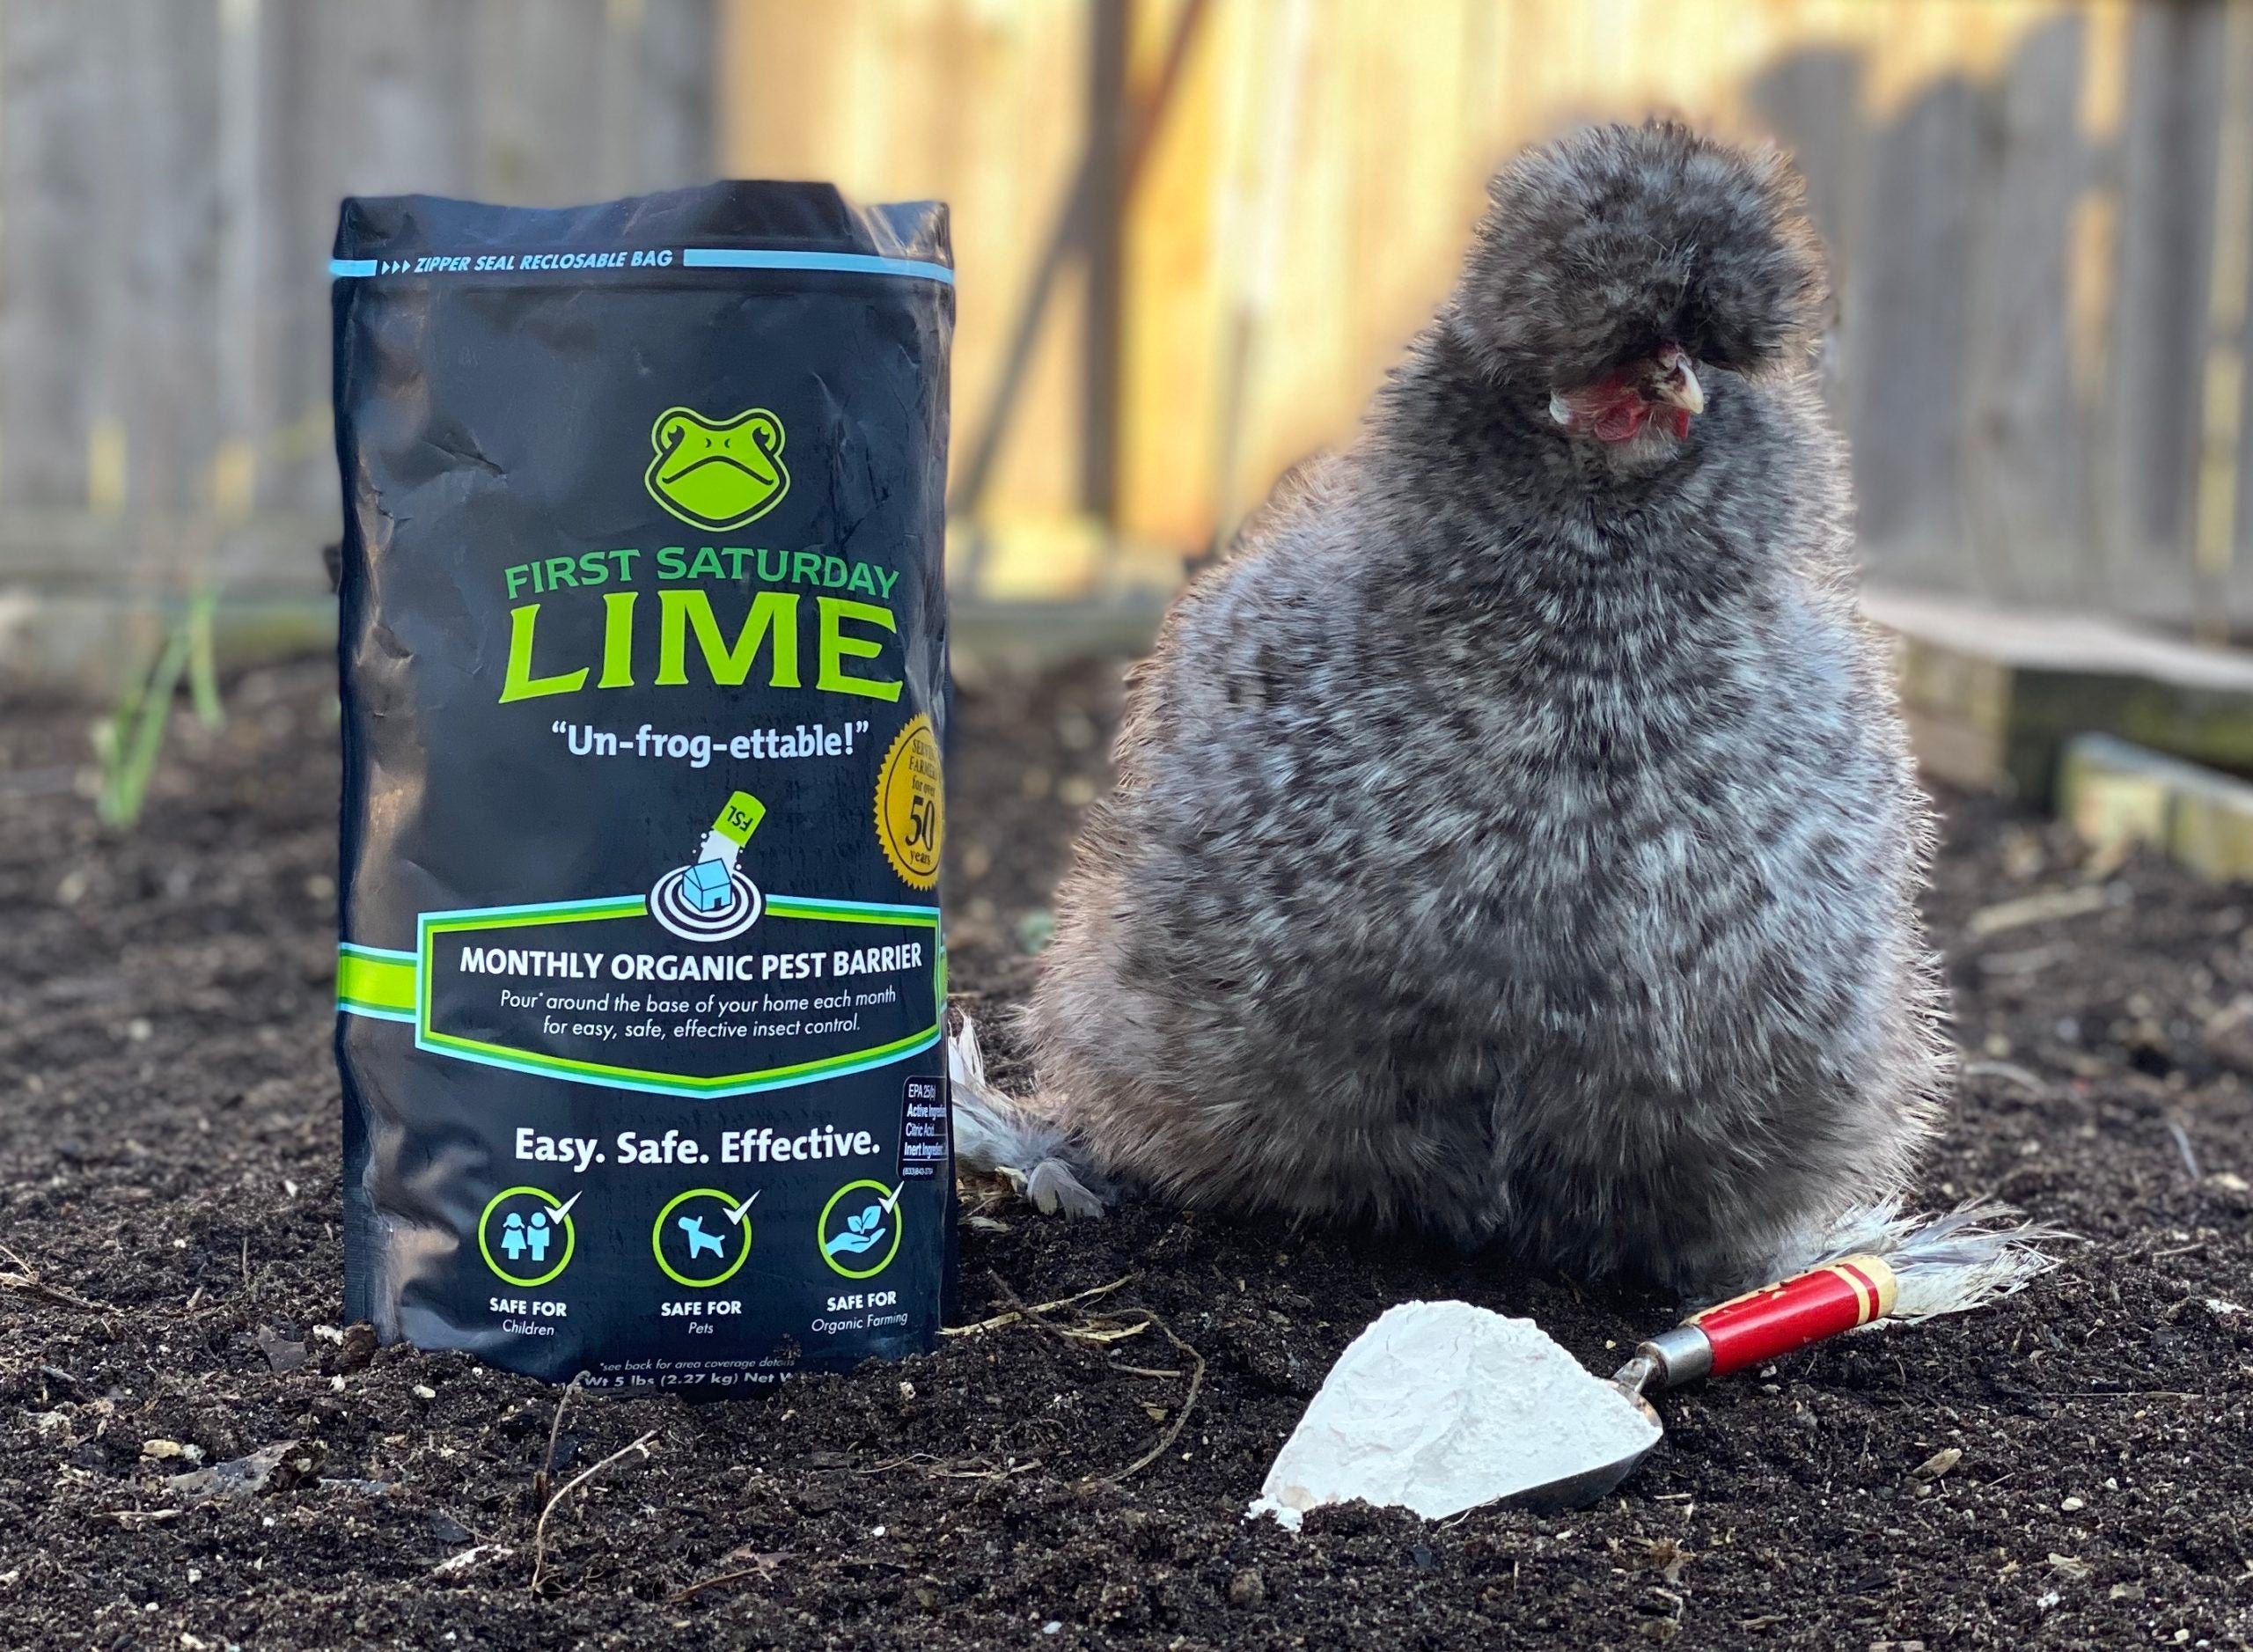 First Saturday Lime & Chickens go together